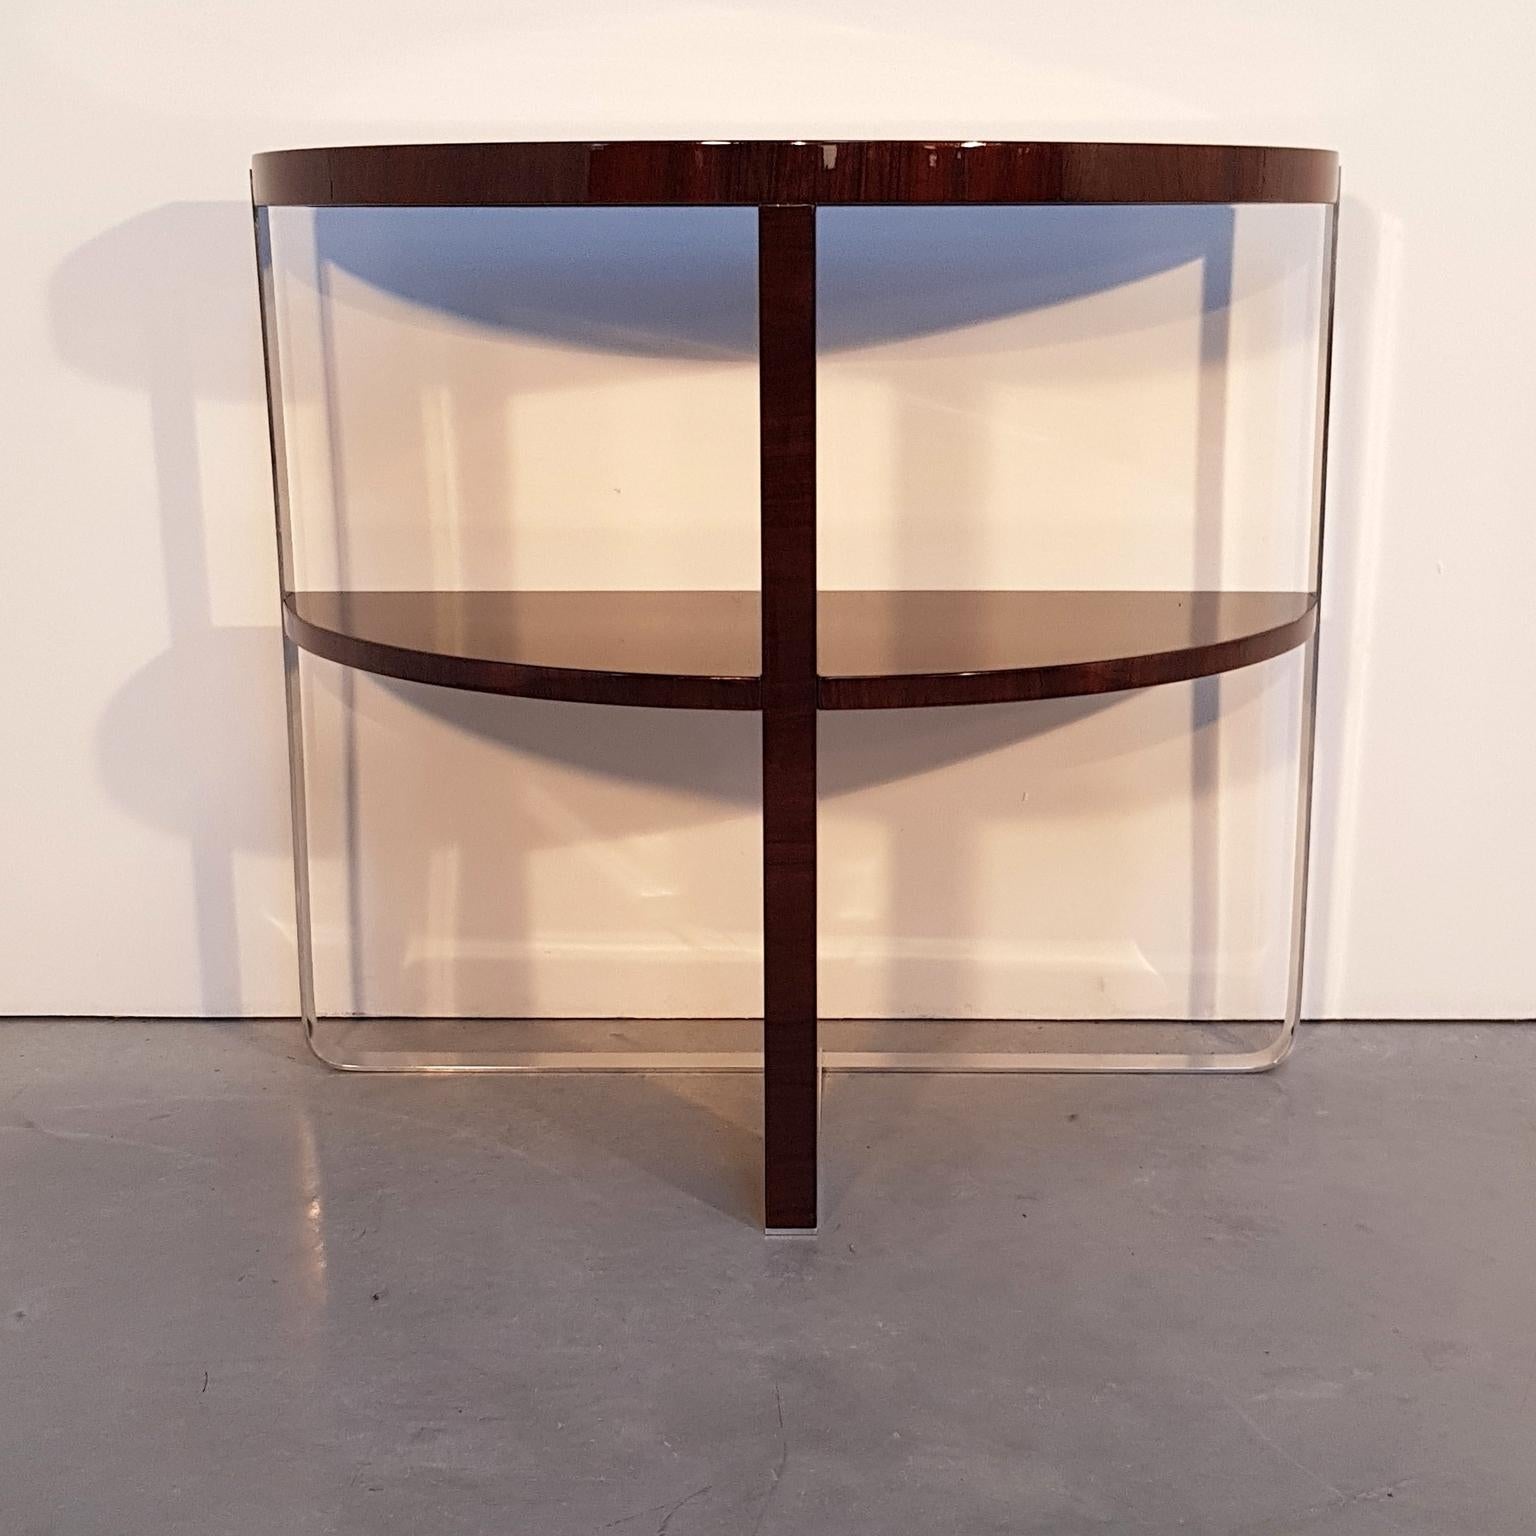 French modern console with lacquered walnut veneer and nickel-plated metal legs. Fresh style from 1980s.